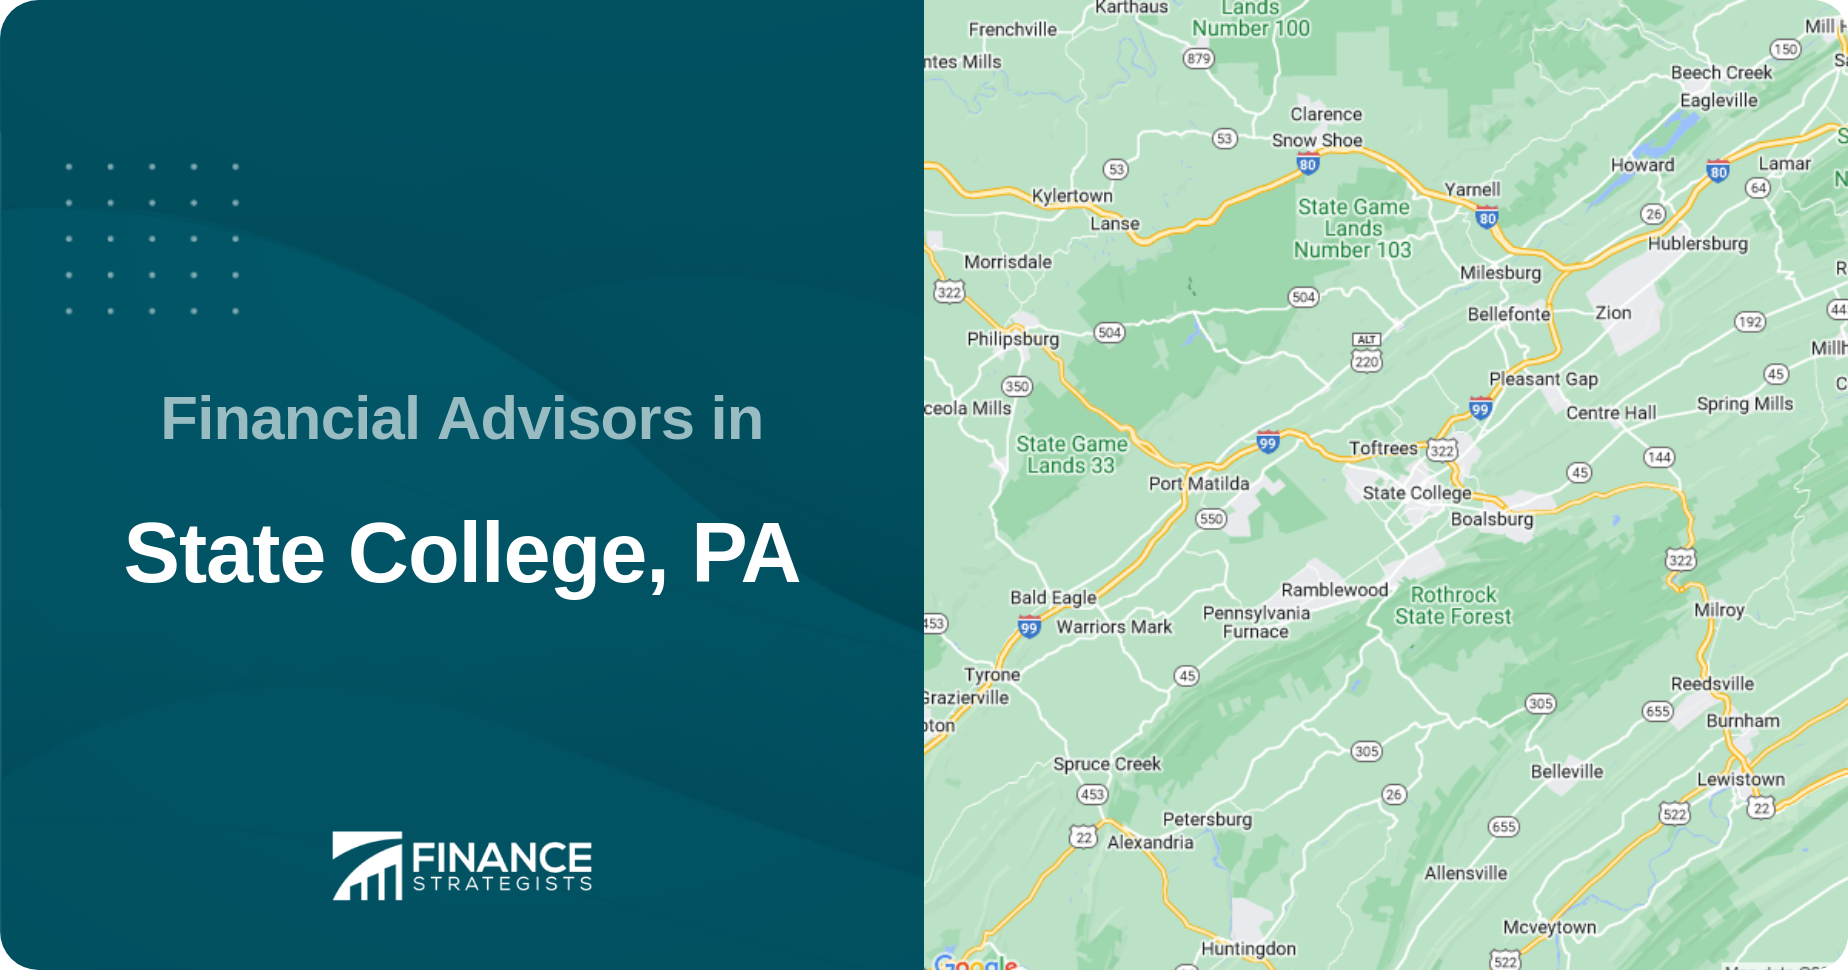 Financial Advisors in State College, PA